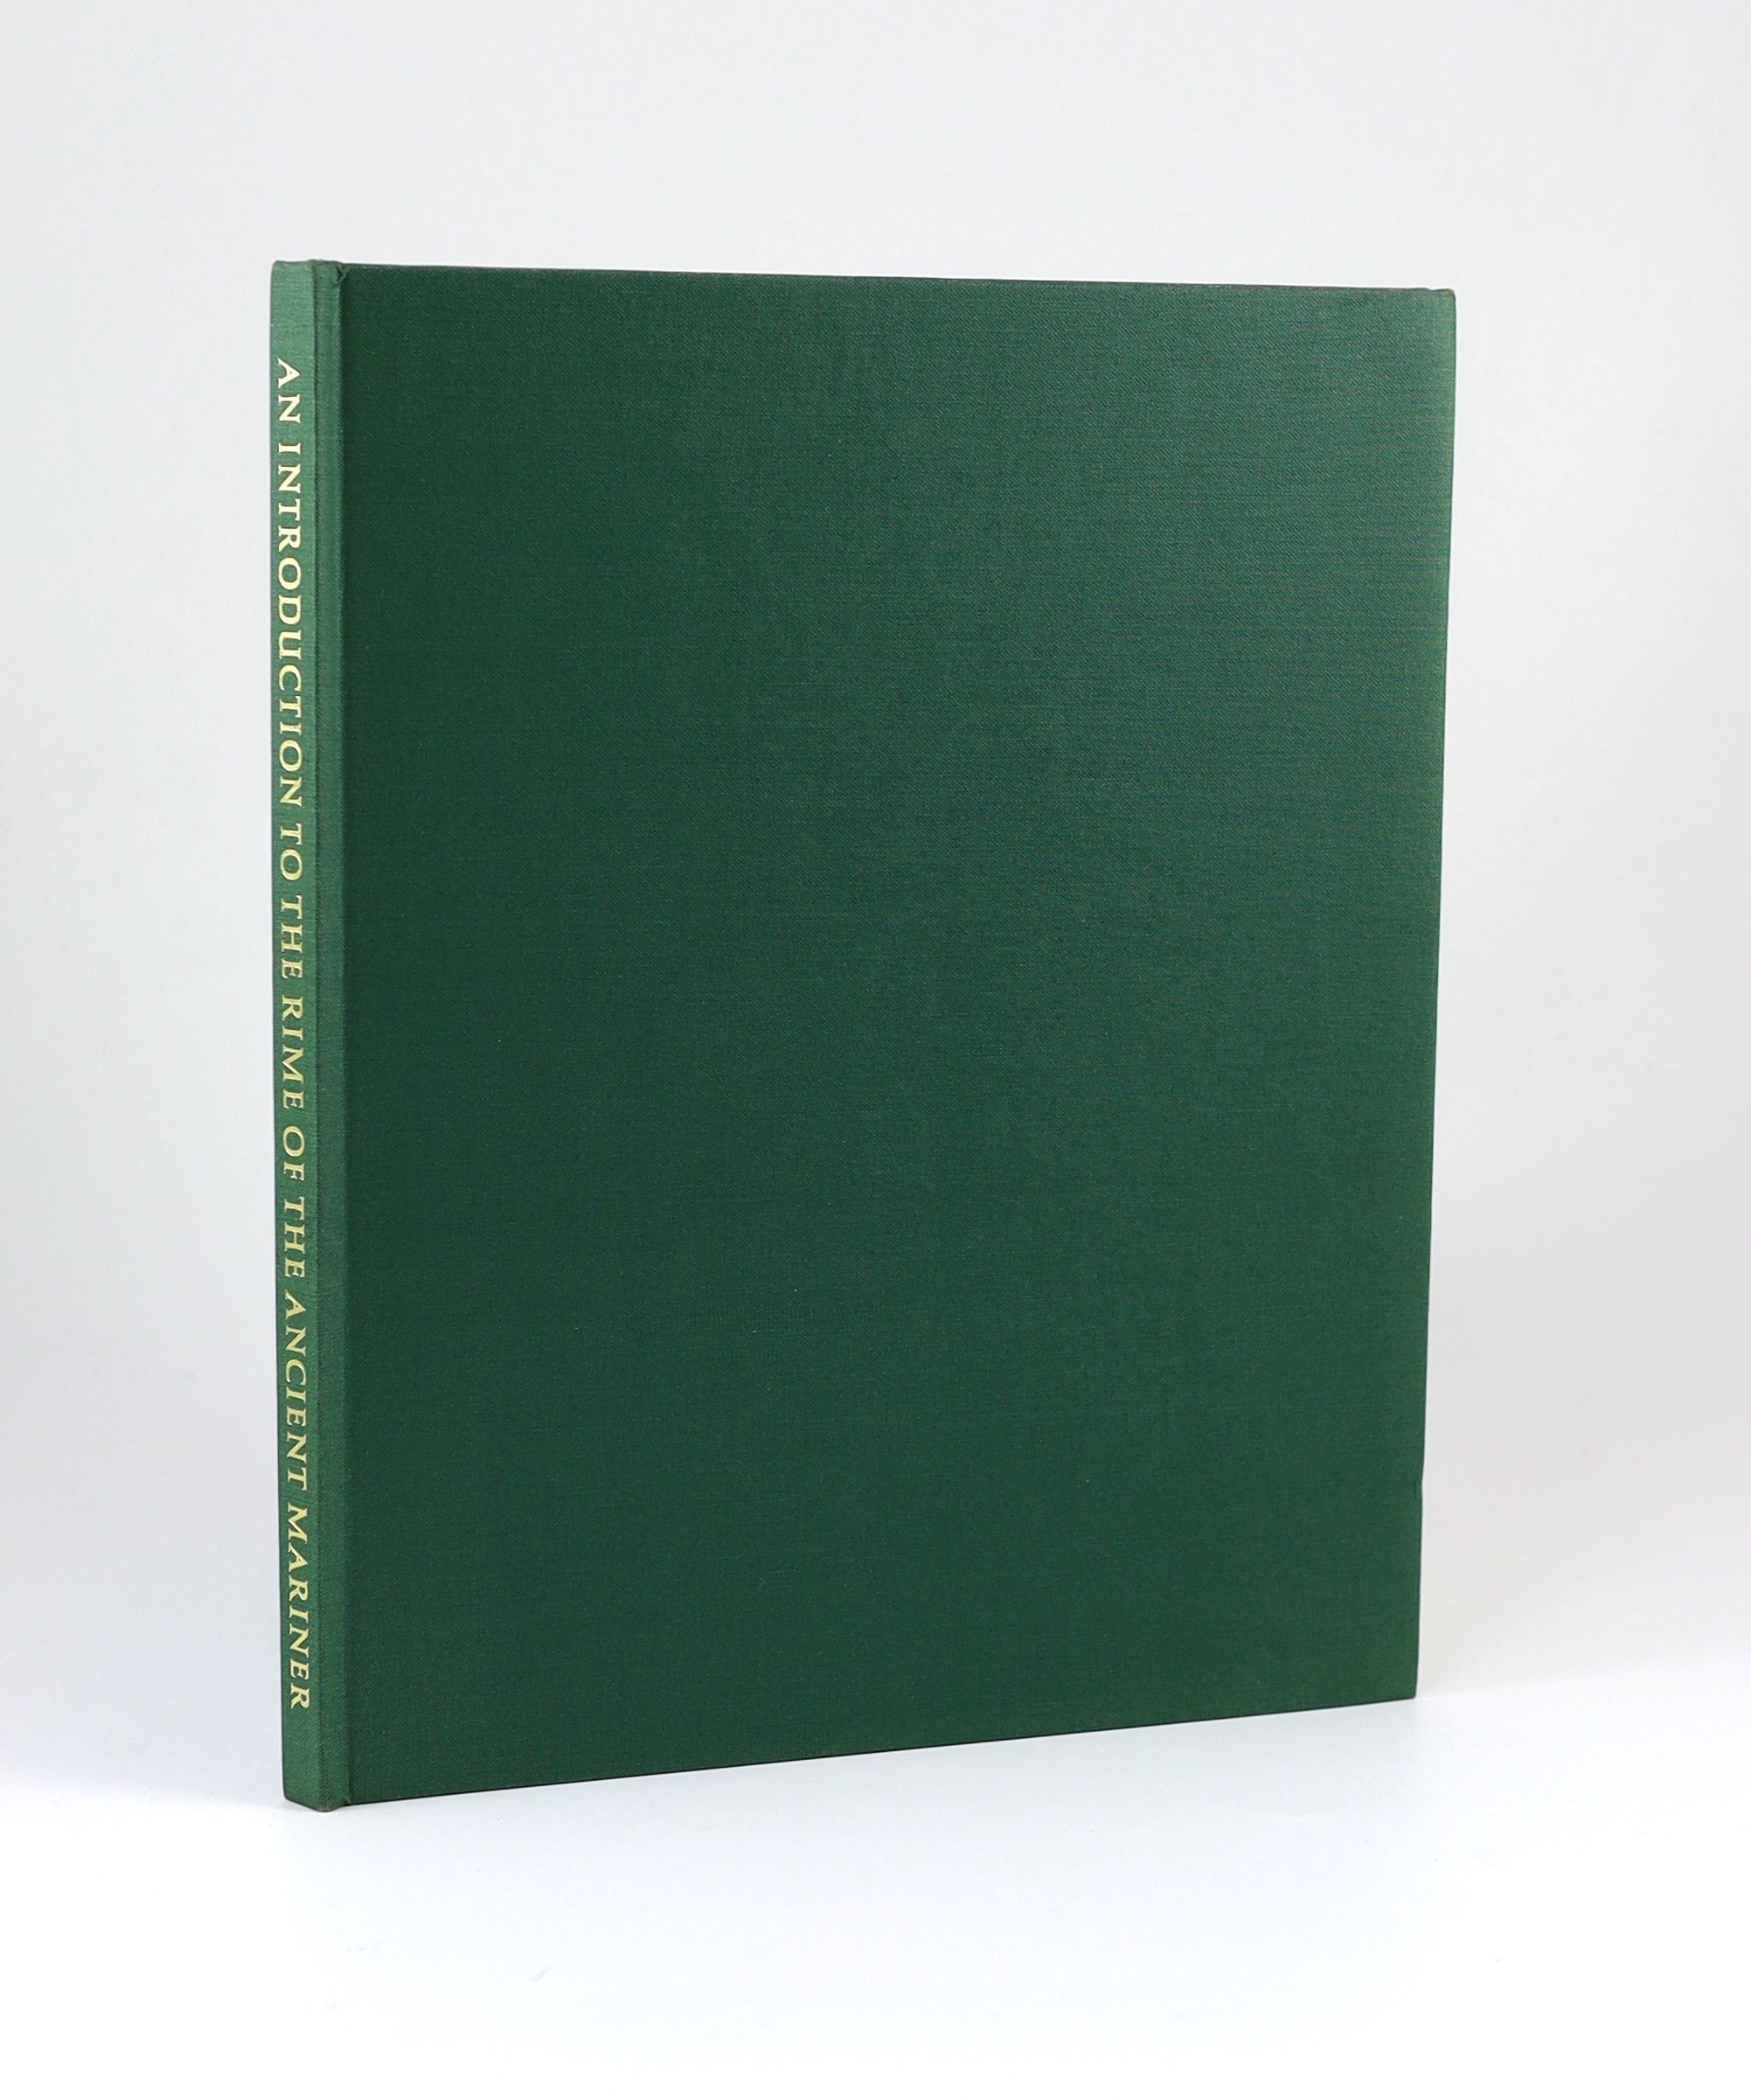 Jones, David - An Introduction to The Rime of the Ancient Mariner. Limited edition, No. 124 of 215. With title page vignette. Buckram with gilt letters direct on spine. Dyed top edge, others rough-cut. 4to. Clover Hill E